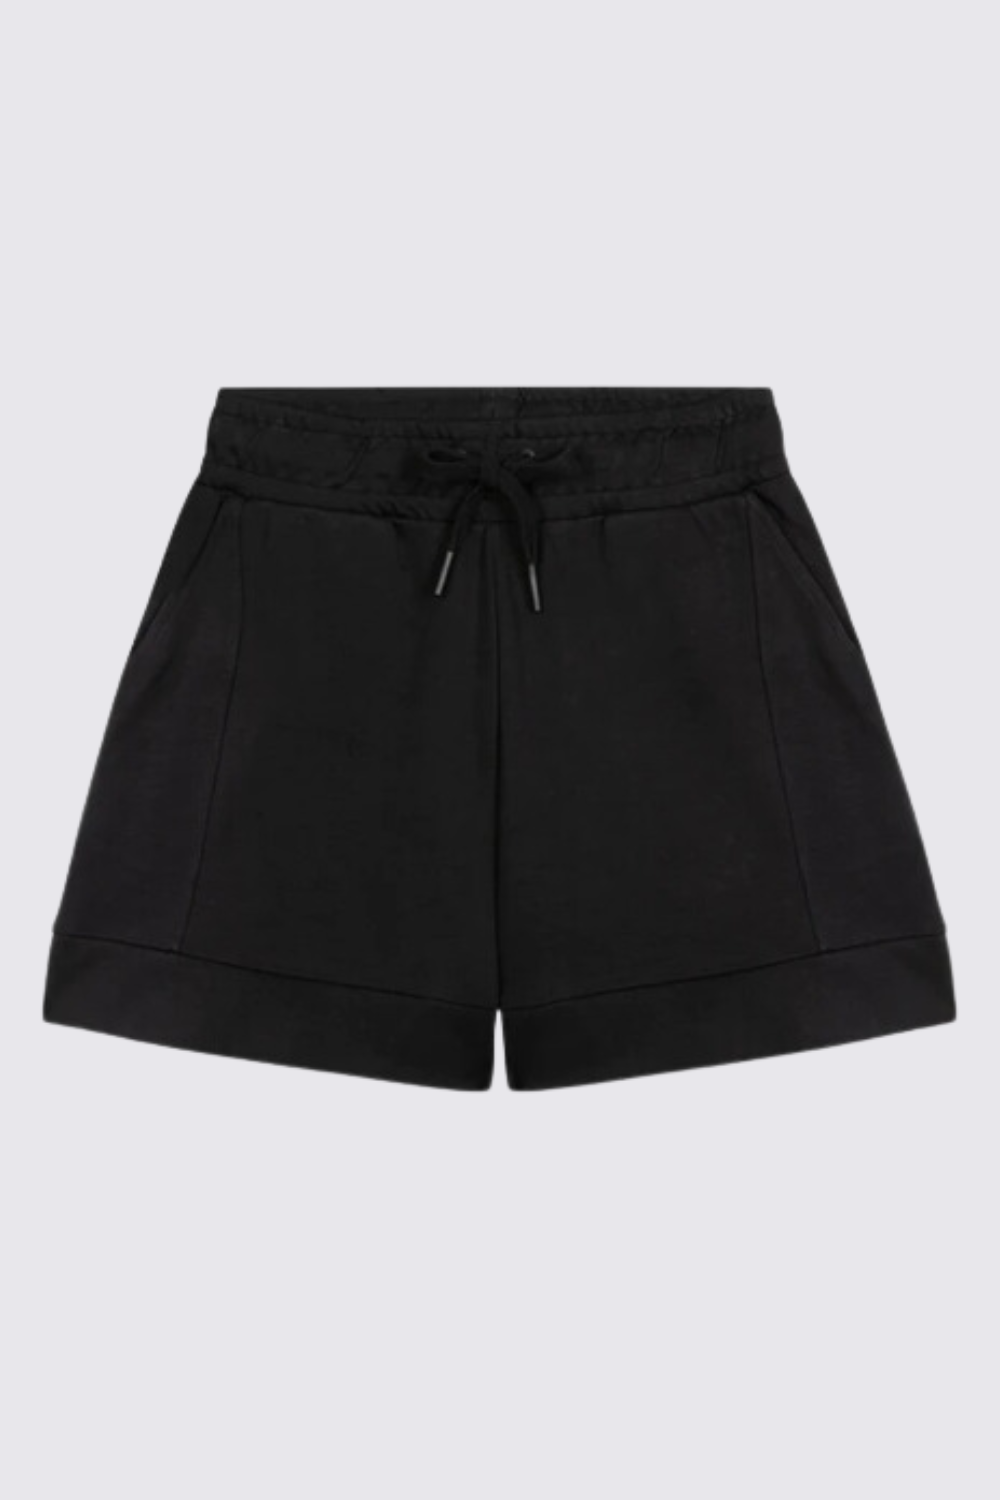 Eleven loves elevenloves 11 loves ellenloves sustainable the perfect jersey shorts black organic cotton co ord sweat set relaxed shorts 